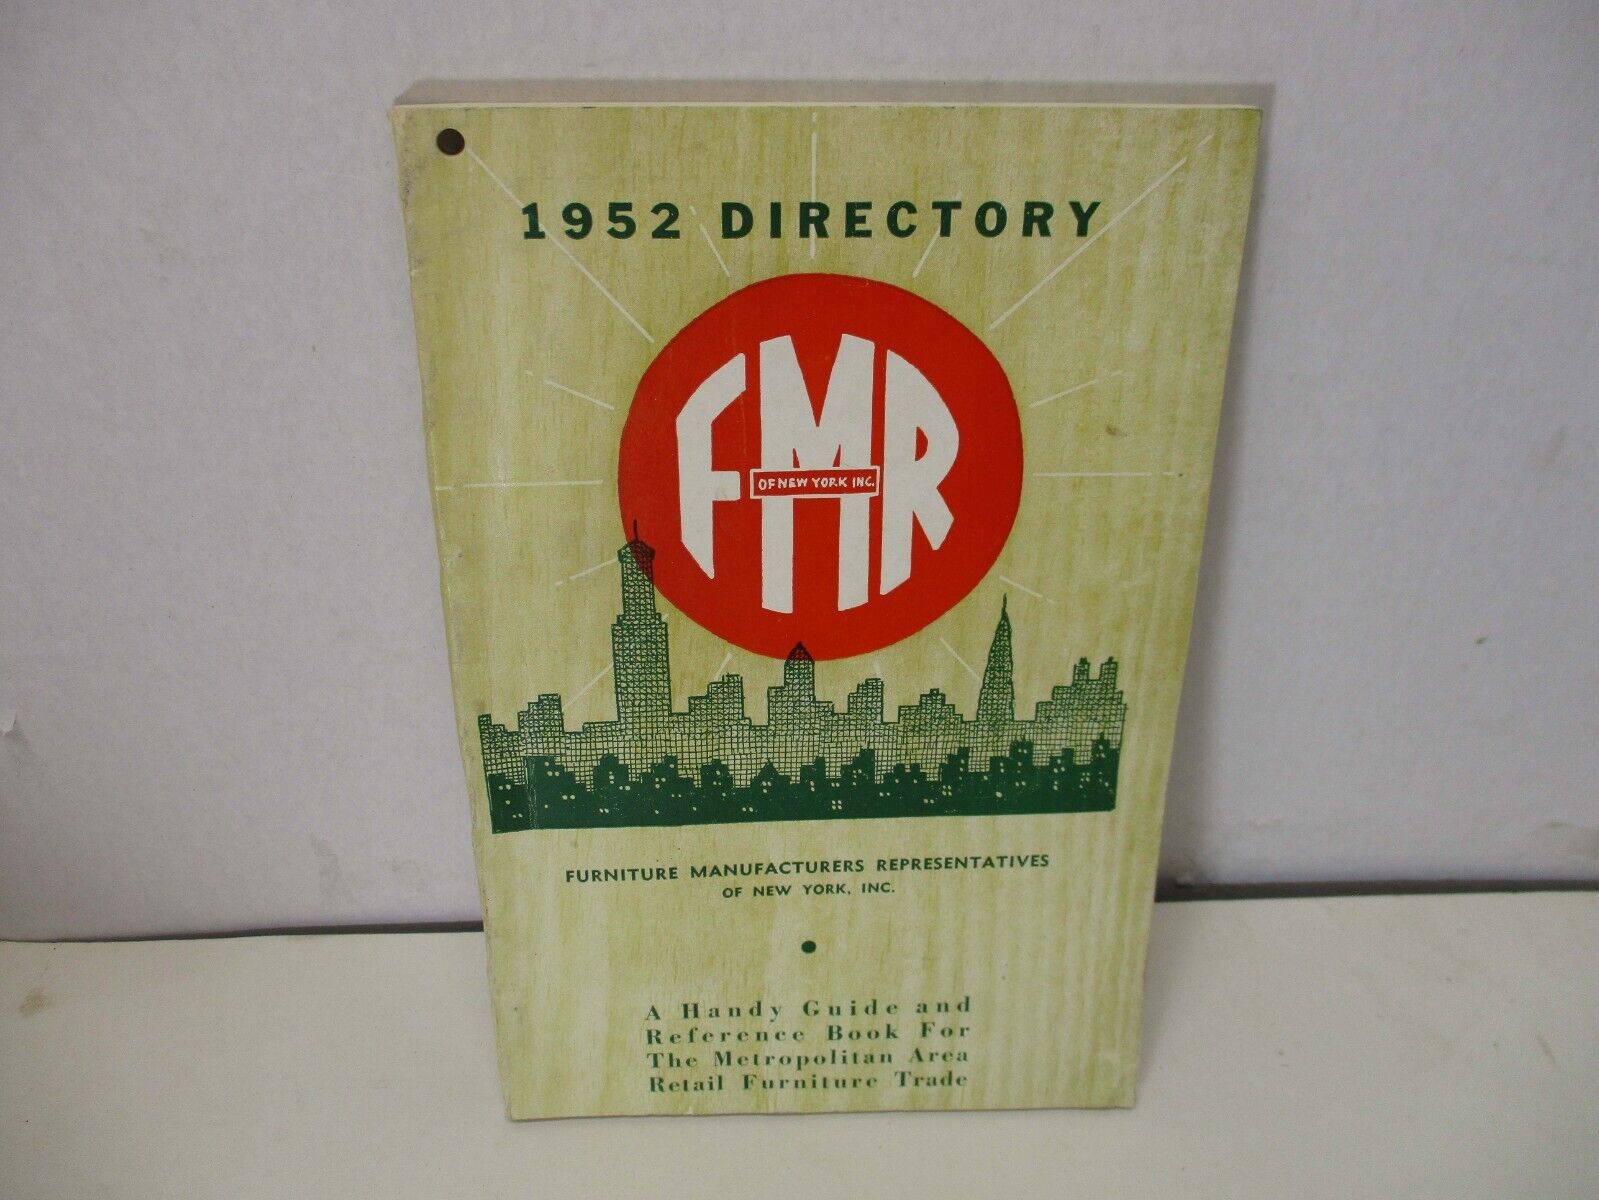 1952 Directory Fmr Furniture Manufacturers Representatives Ny